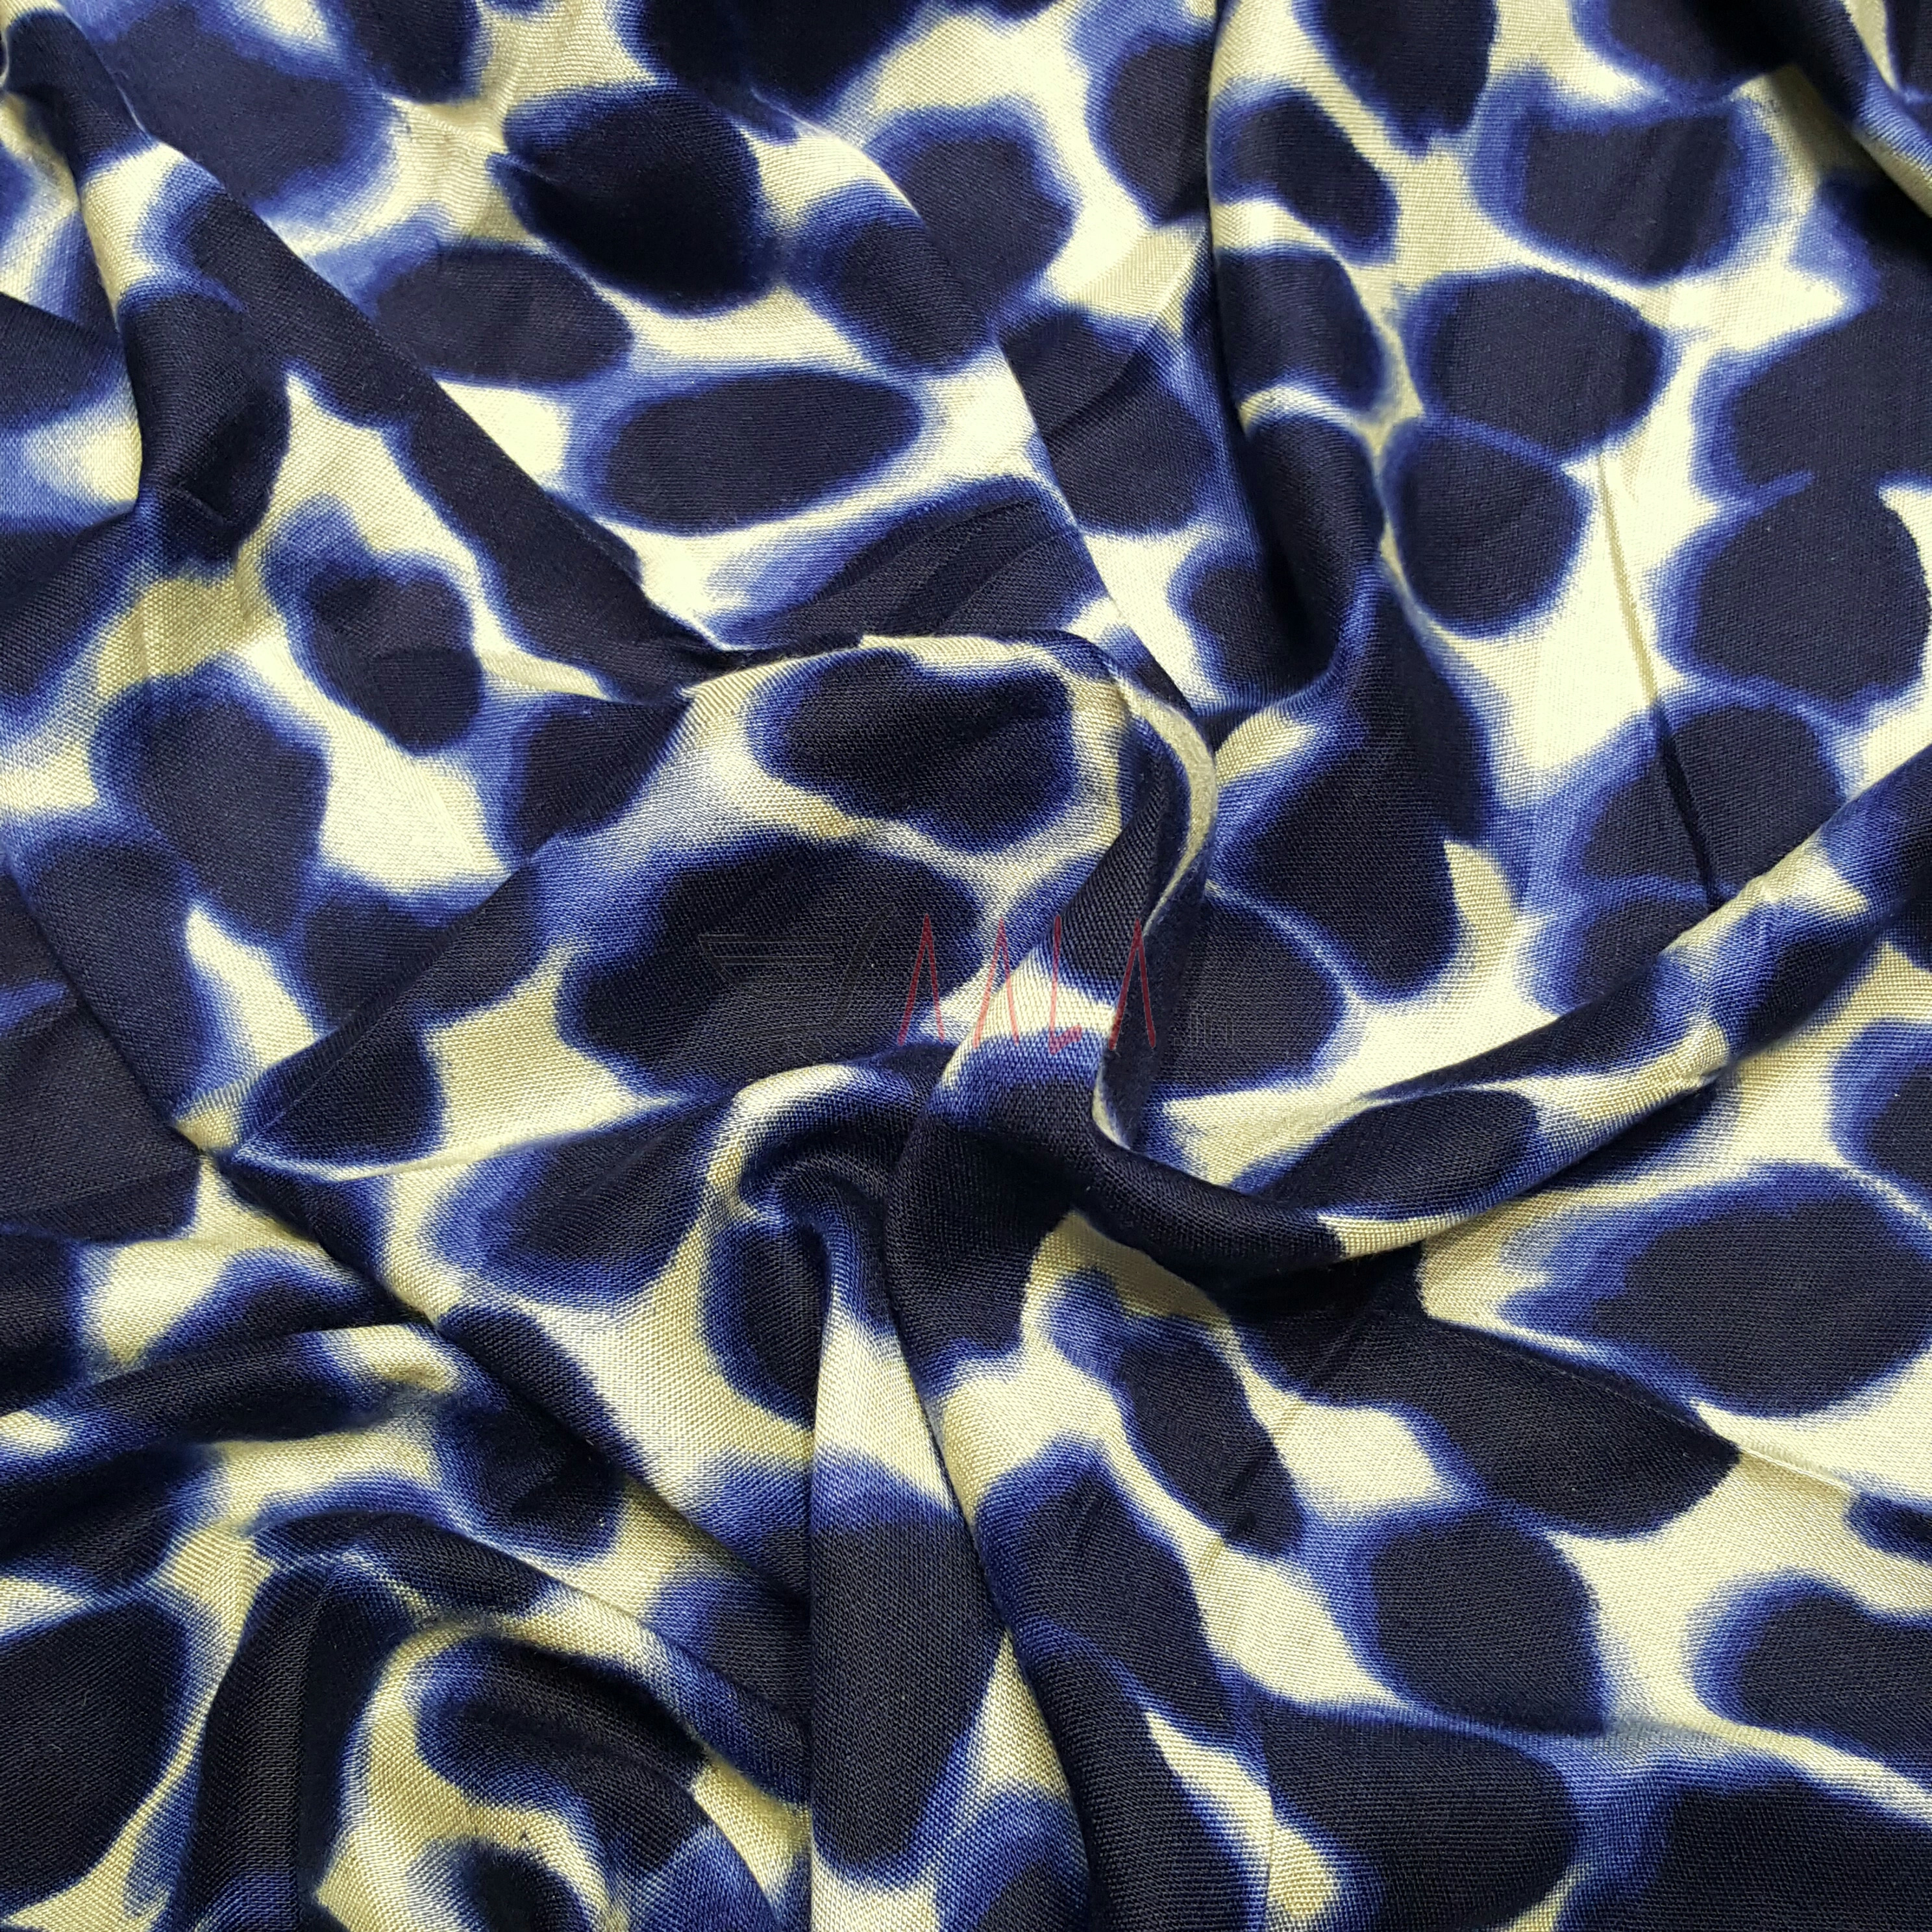 Printed Rayon Cotton 44 Inches Per Metre #2045